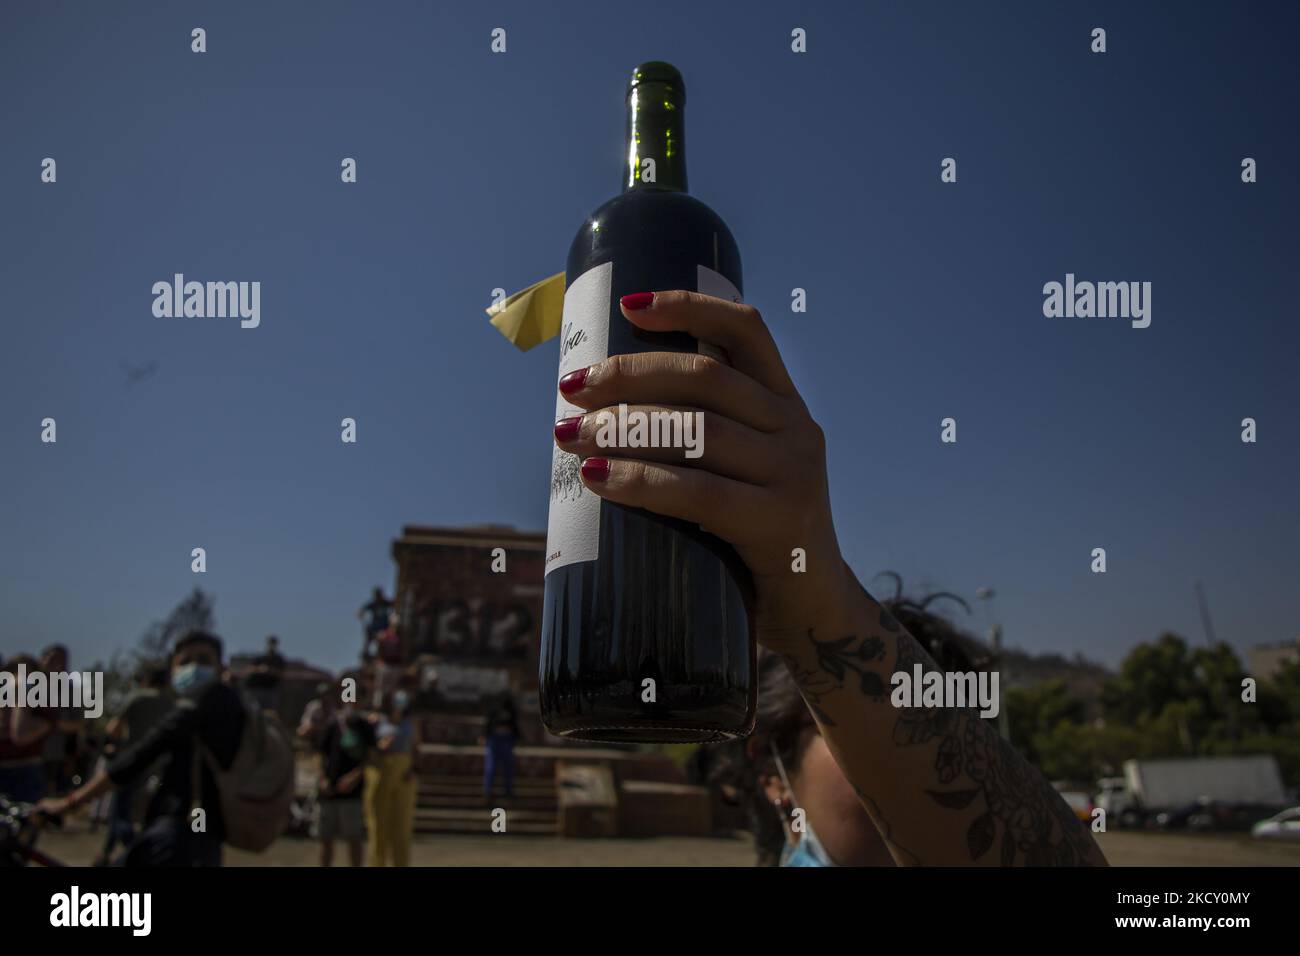 A person holds a bottle of wine while celebrating the death of Lucia Hiriart (99), widow of dictator Augusto Pinochet. On December 16, 2021. Santiago, Chile. (Photo by Claudio Abarca Sandoval/NurPhoto) Stock Photo